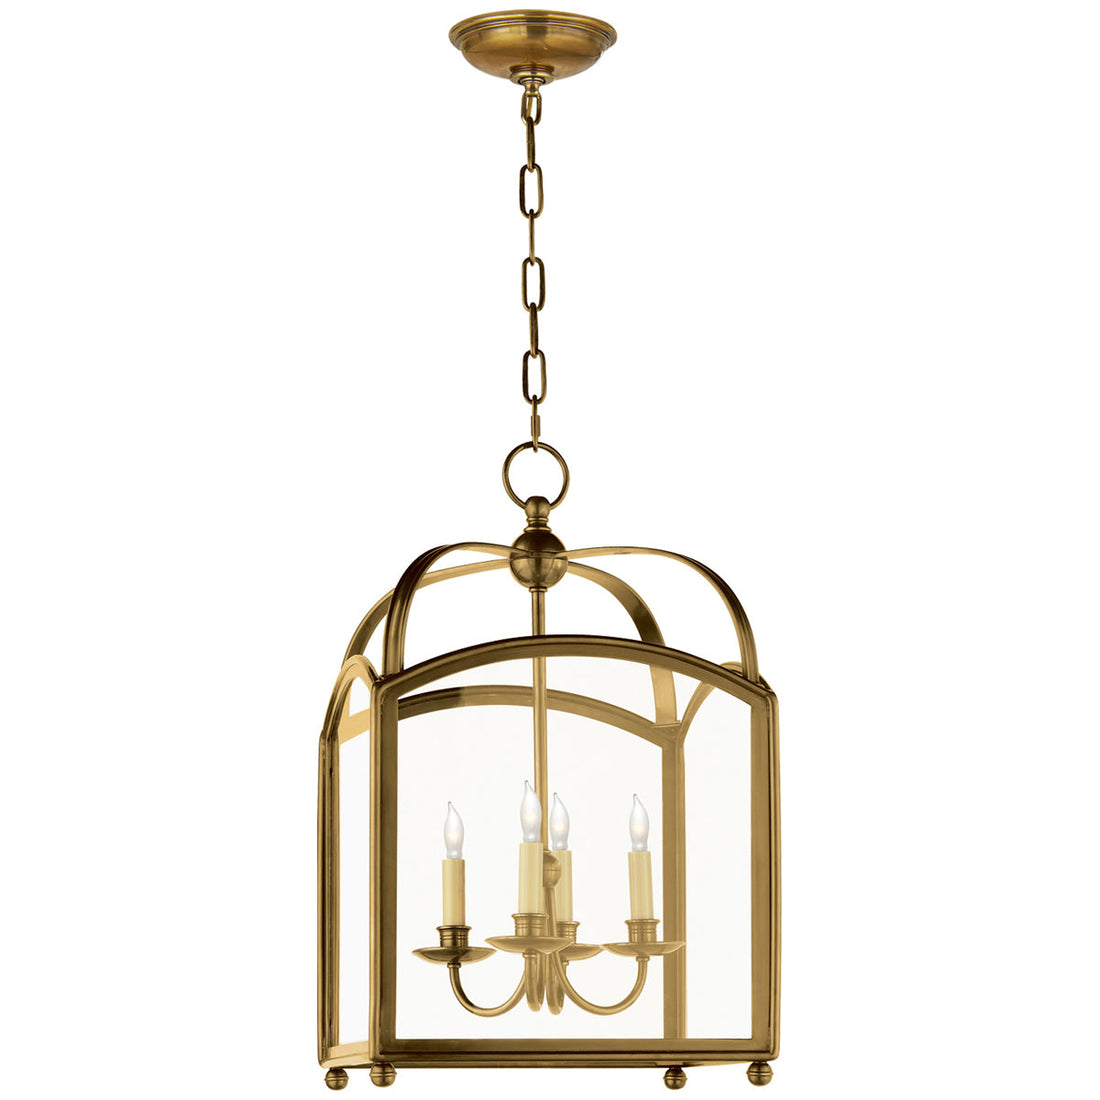 EF CHAPMAN for VISUAL COMFORT Zodiac Pendant Light in Antiqued Brass